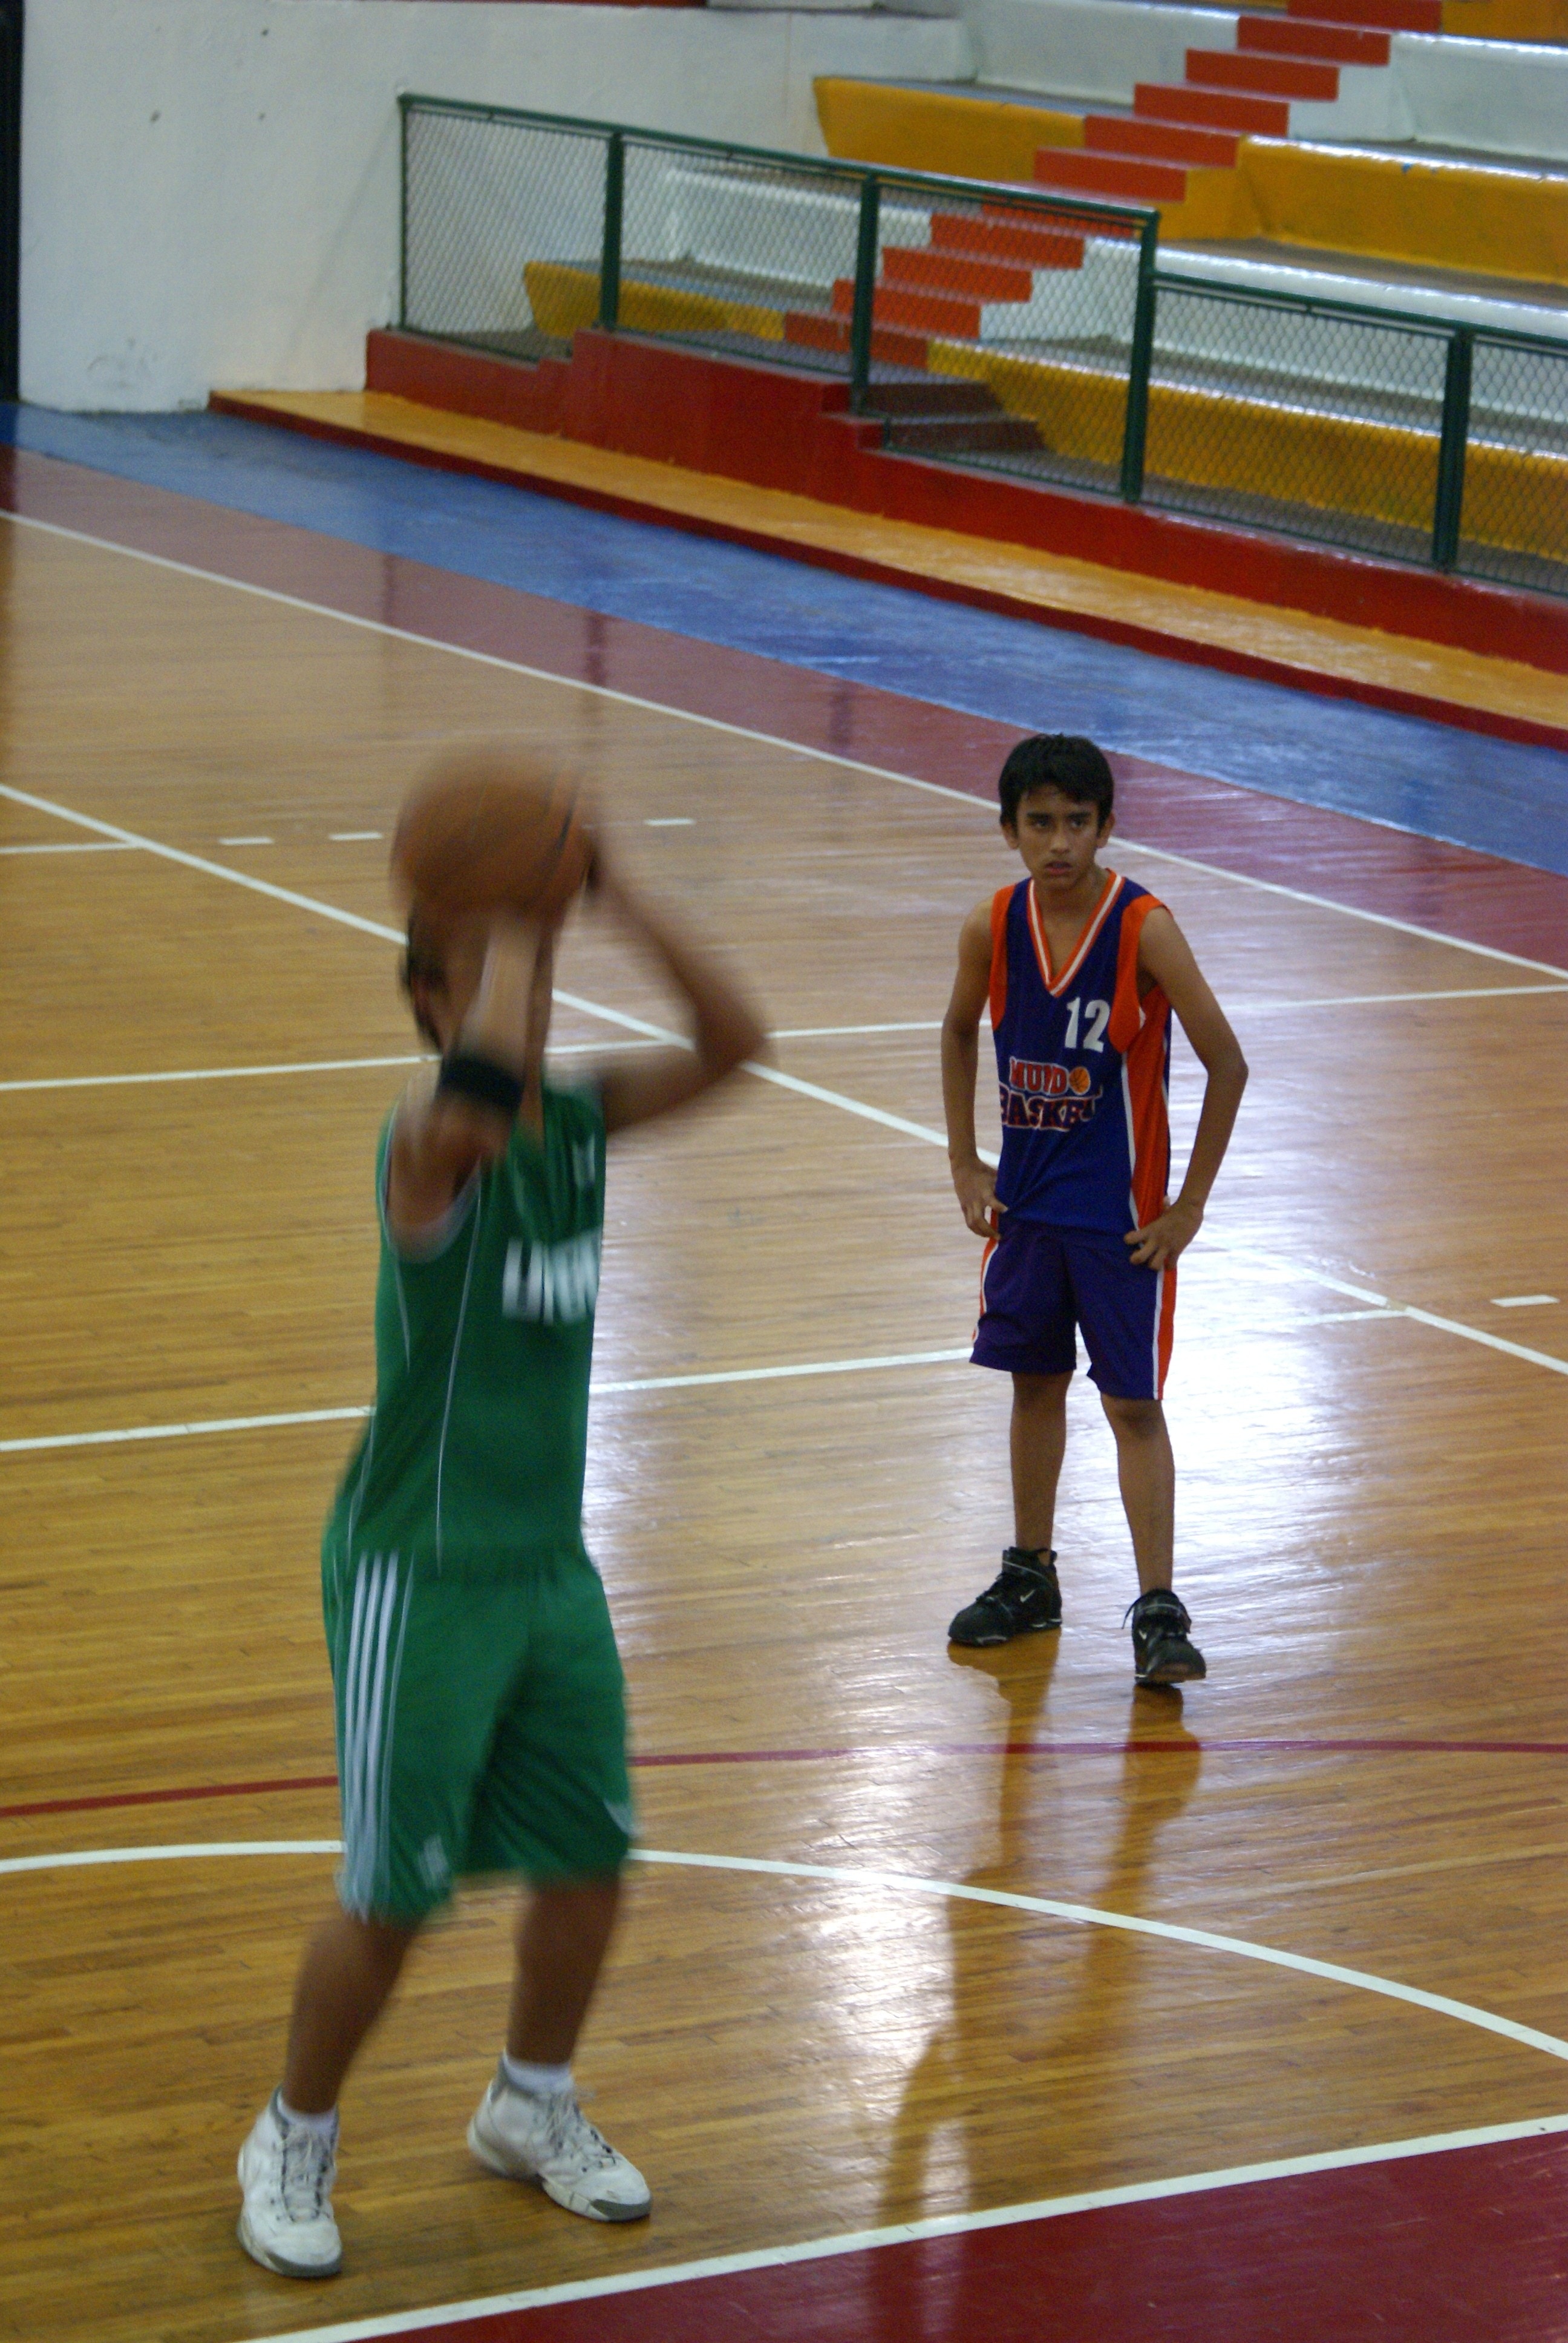 boy's blue and red basketball jersey